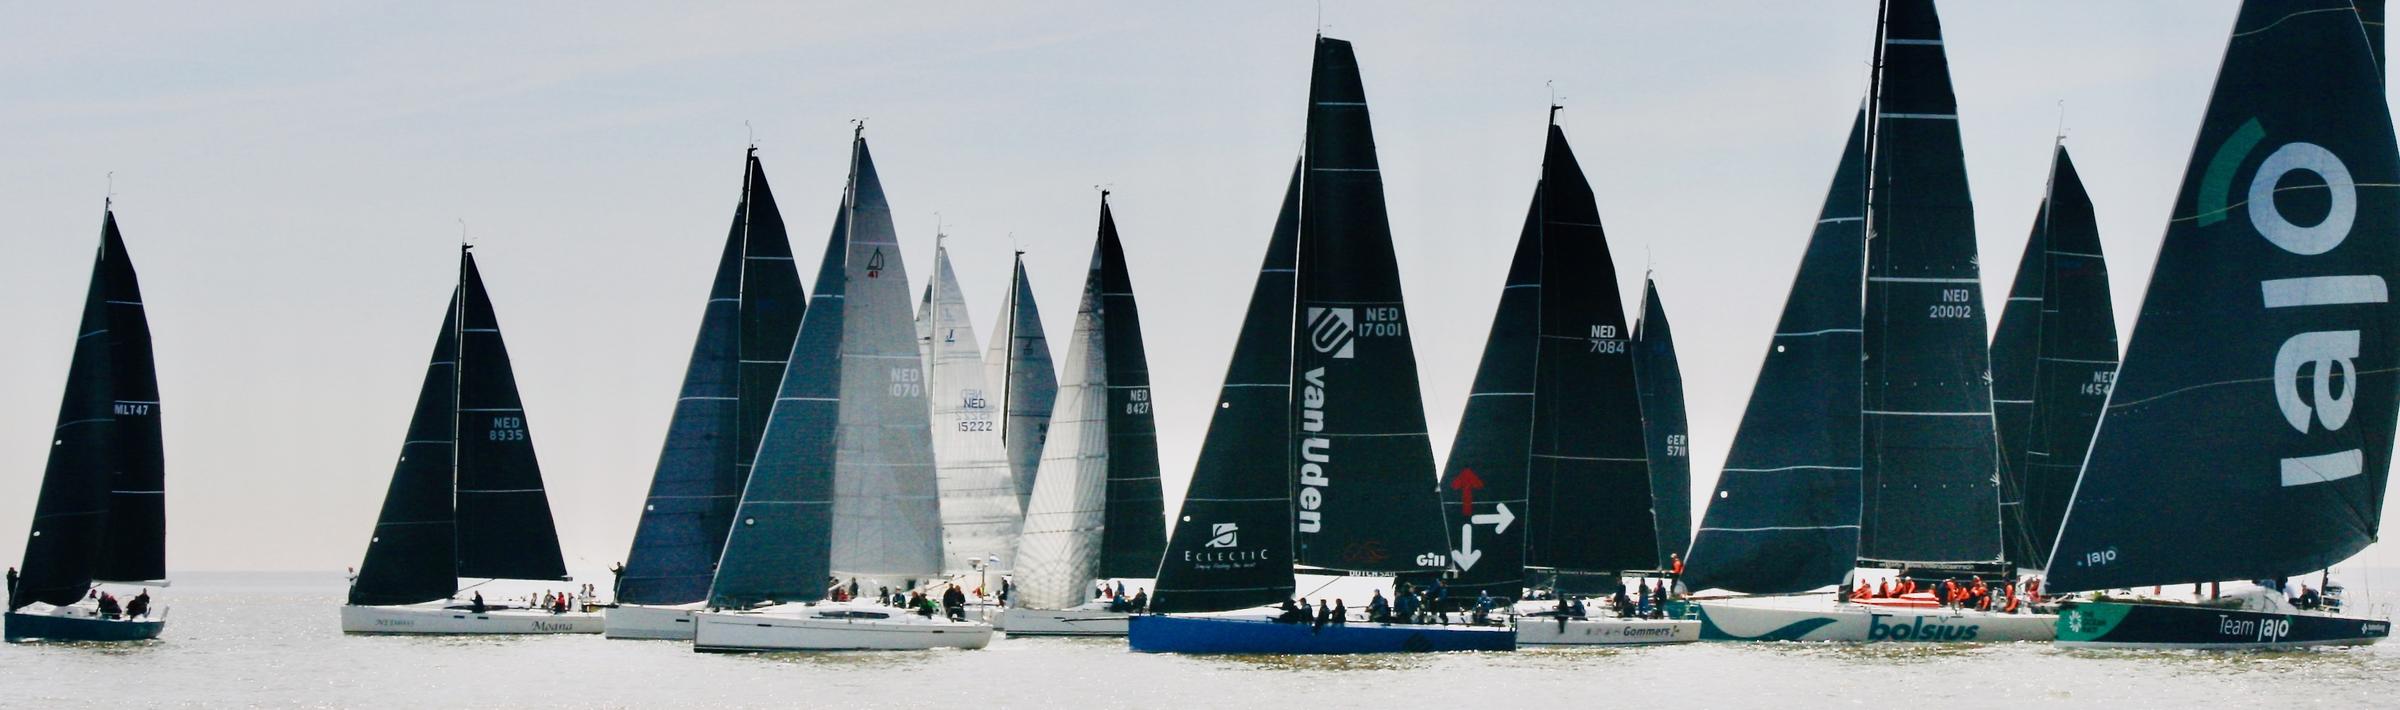 Start of the RORC North Sea Race 2024 © RHYC Vice Commodore Mark Dean. The Royal Ocean Racing Club’s North Sea Race is hosted by the Royal Harwich Yacht Club in association with the East Anglian Offshore Racing Association, the Yacht Club Scheveningen and the North Sea Regatta.